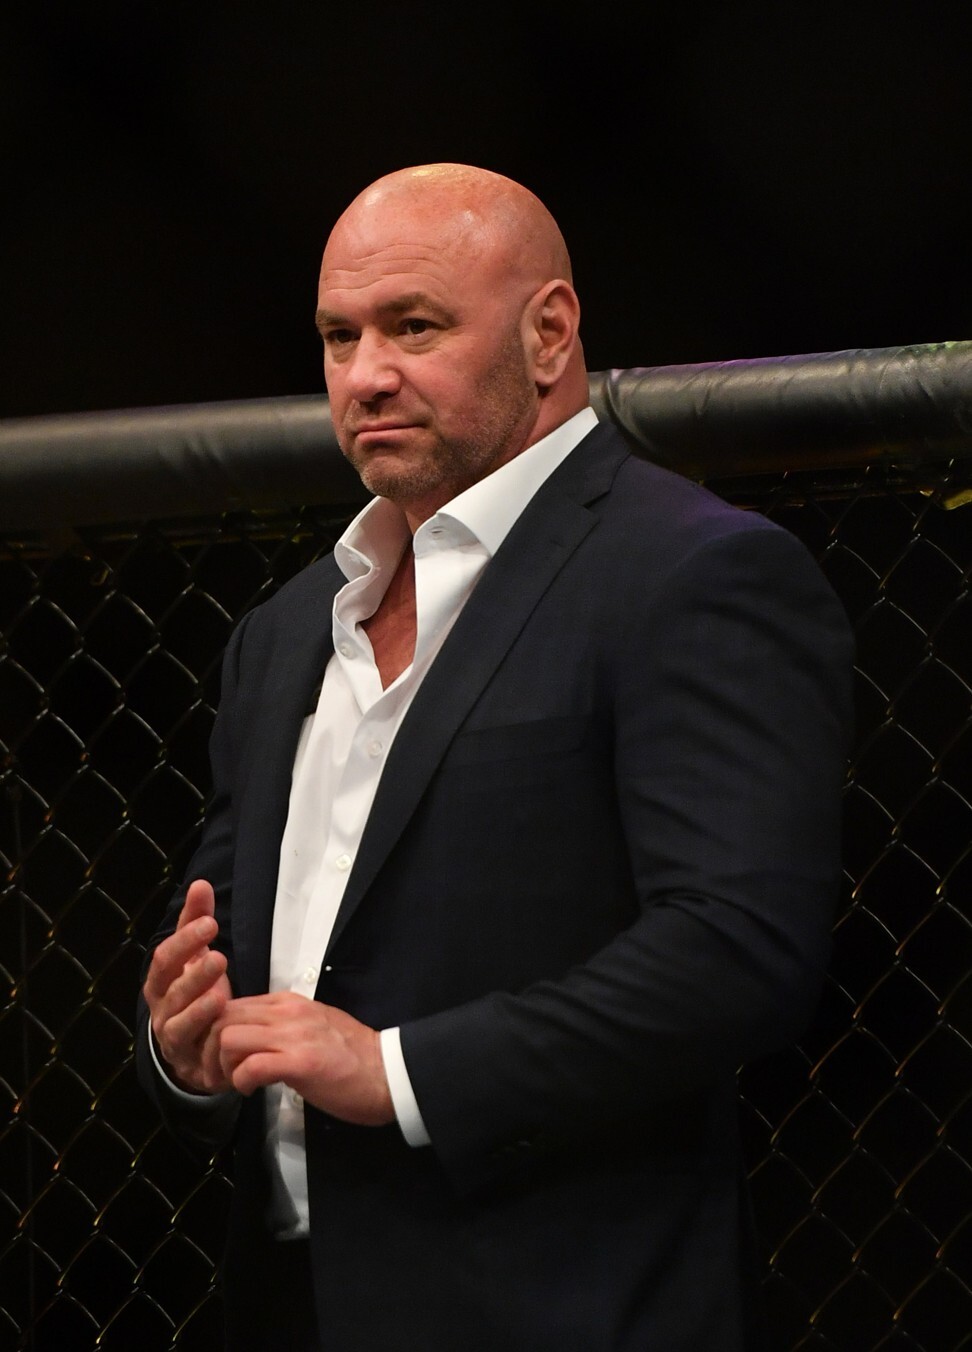 Dana White in the Octagon at UFC 249. Photo: USA TODAY Sports